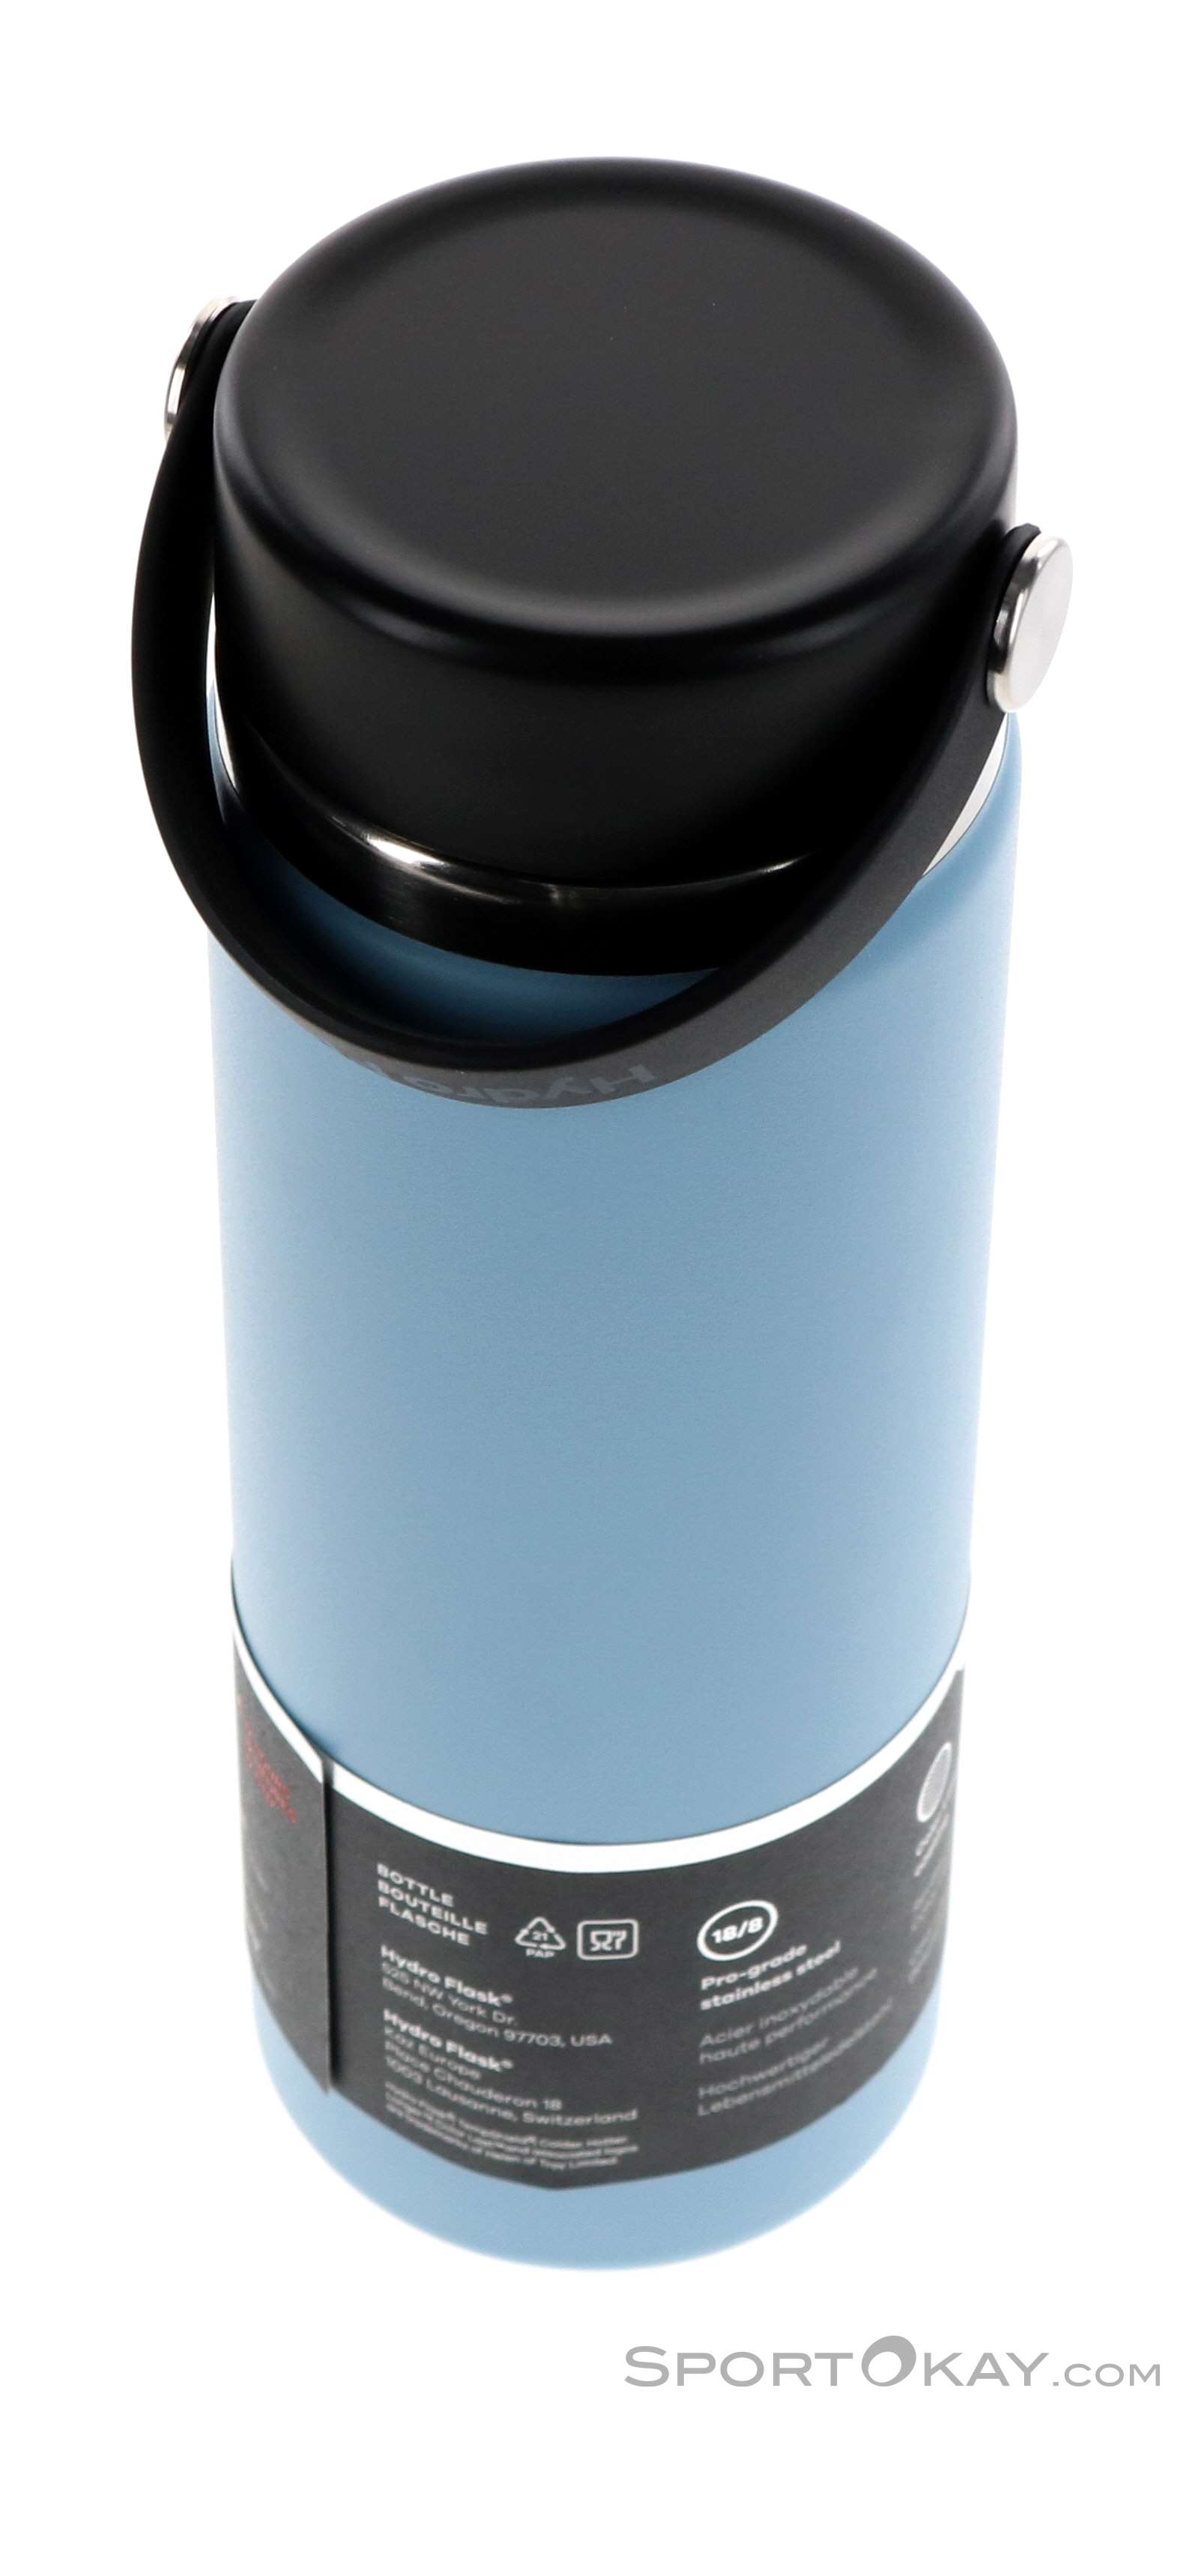 Blue Stainless Steel Soup Thermos, 13 Oz.